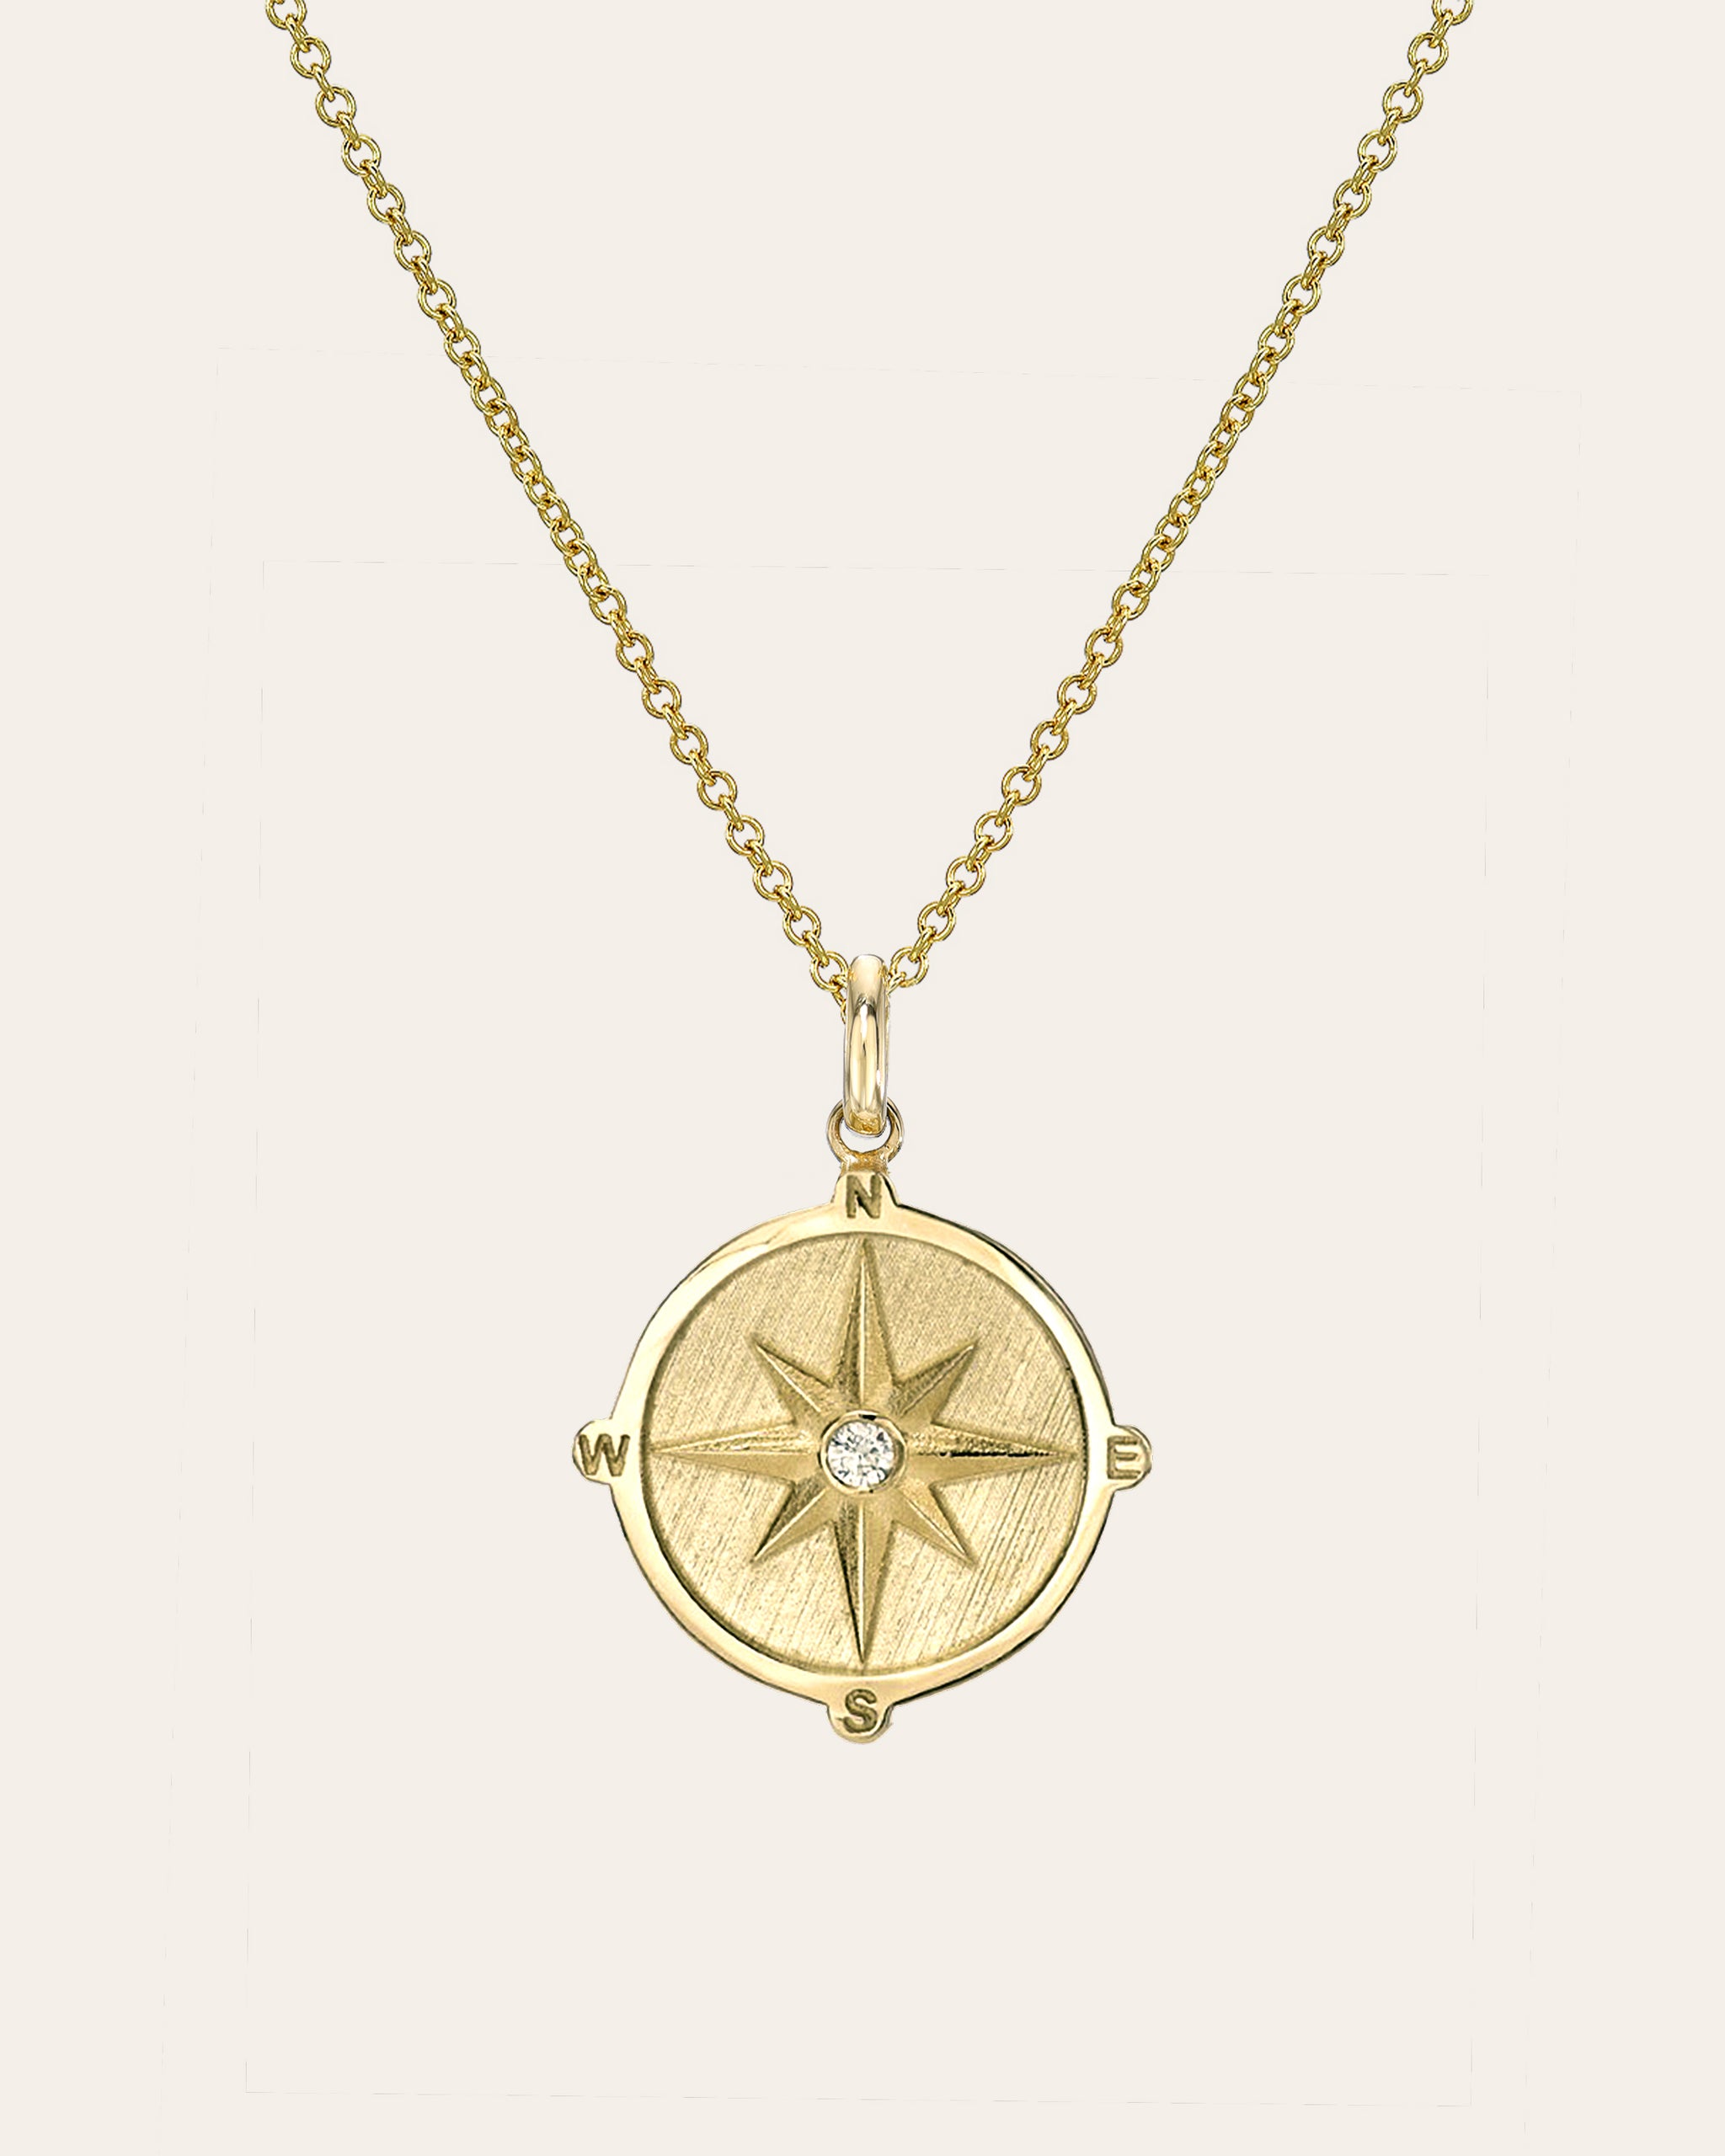 14K Gold Filled 23mm Round Compass Locket Necklace